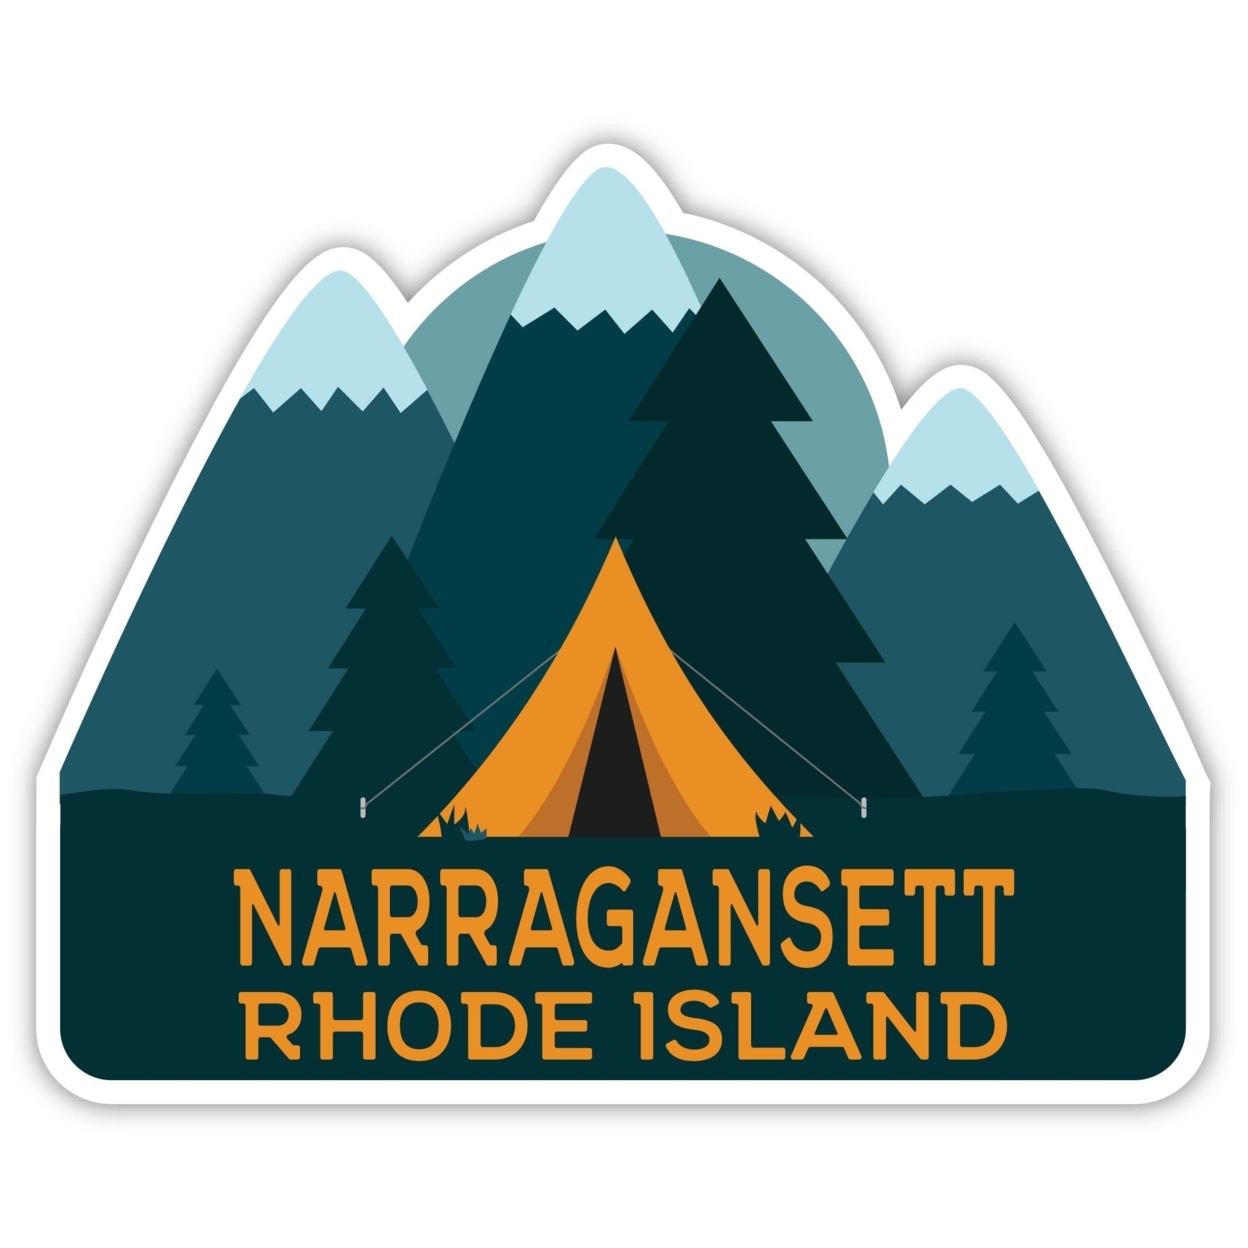 Narragansett Rhode Island Souvenir Decorative Stickers (Choose Theme And Size) - Single Unit, 4-Inch, Great Outdoors